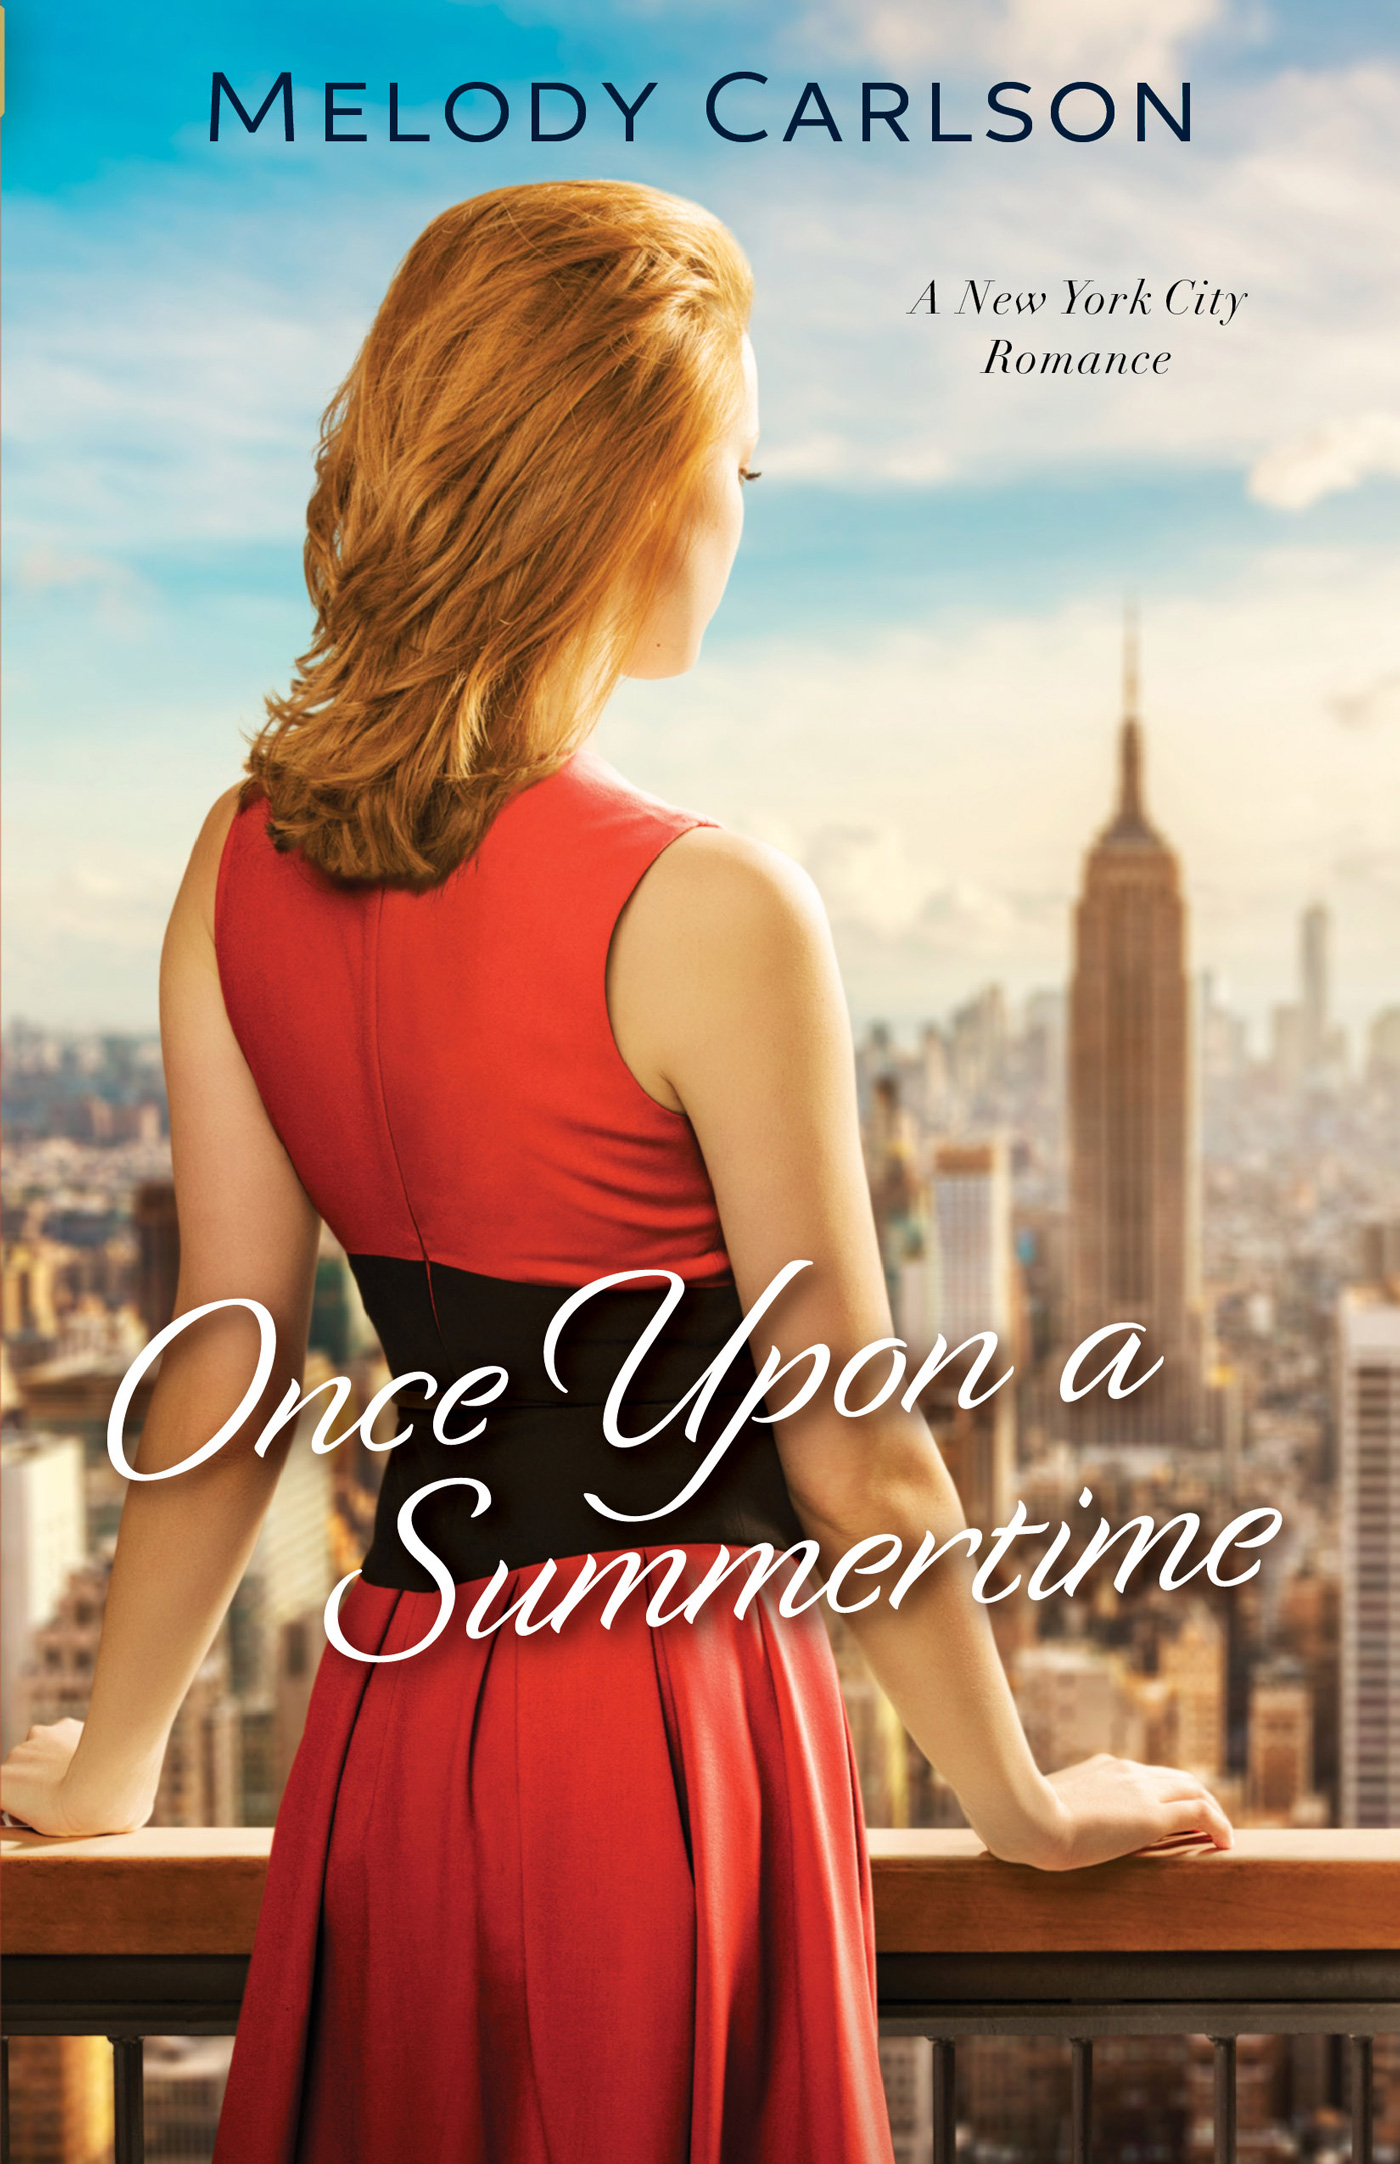 Once Upon a Summertime (2015)